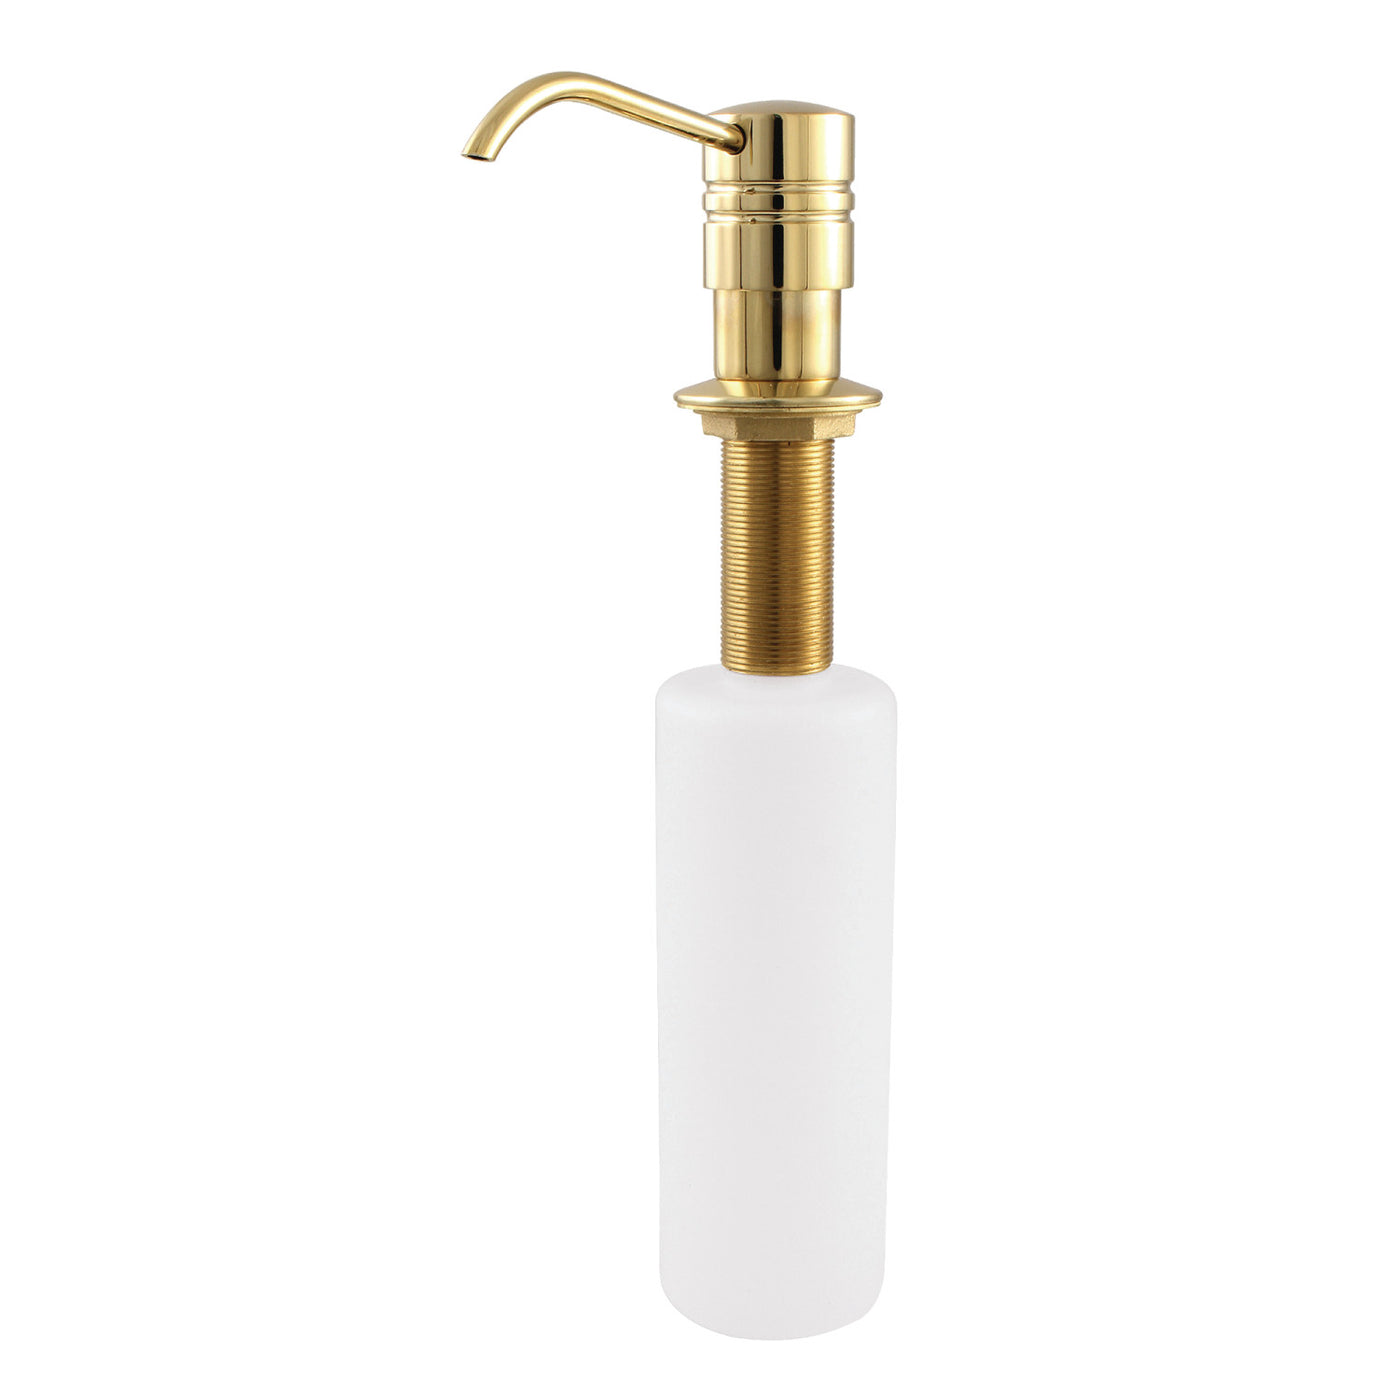 Elements of Design ESD2612 Straight Nozzle Metal Soap Dispenser, Polished Brass